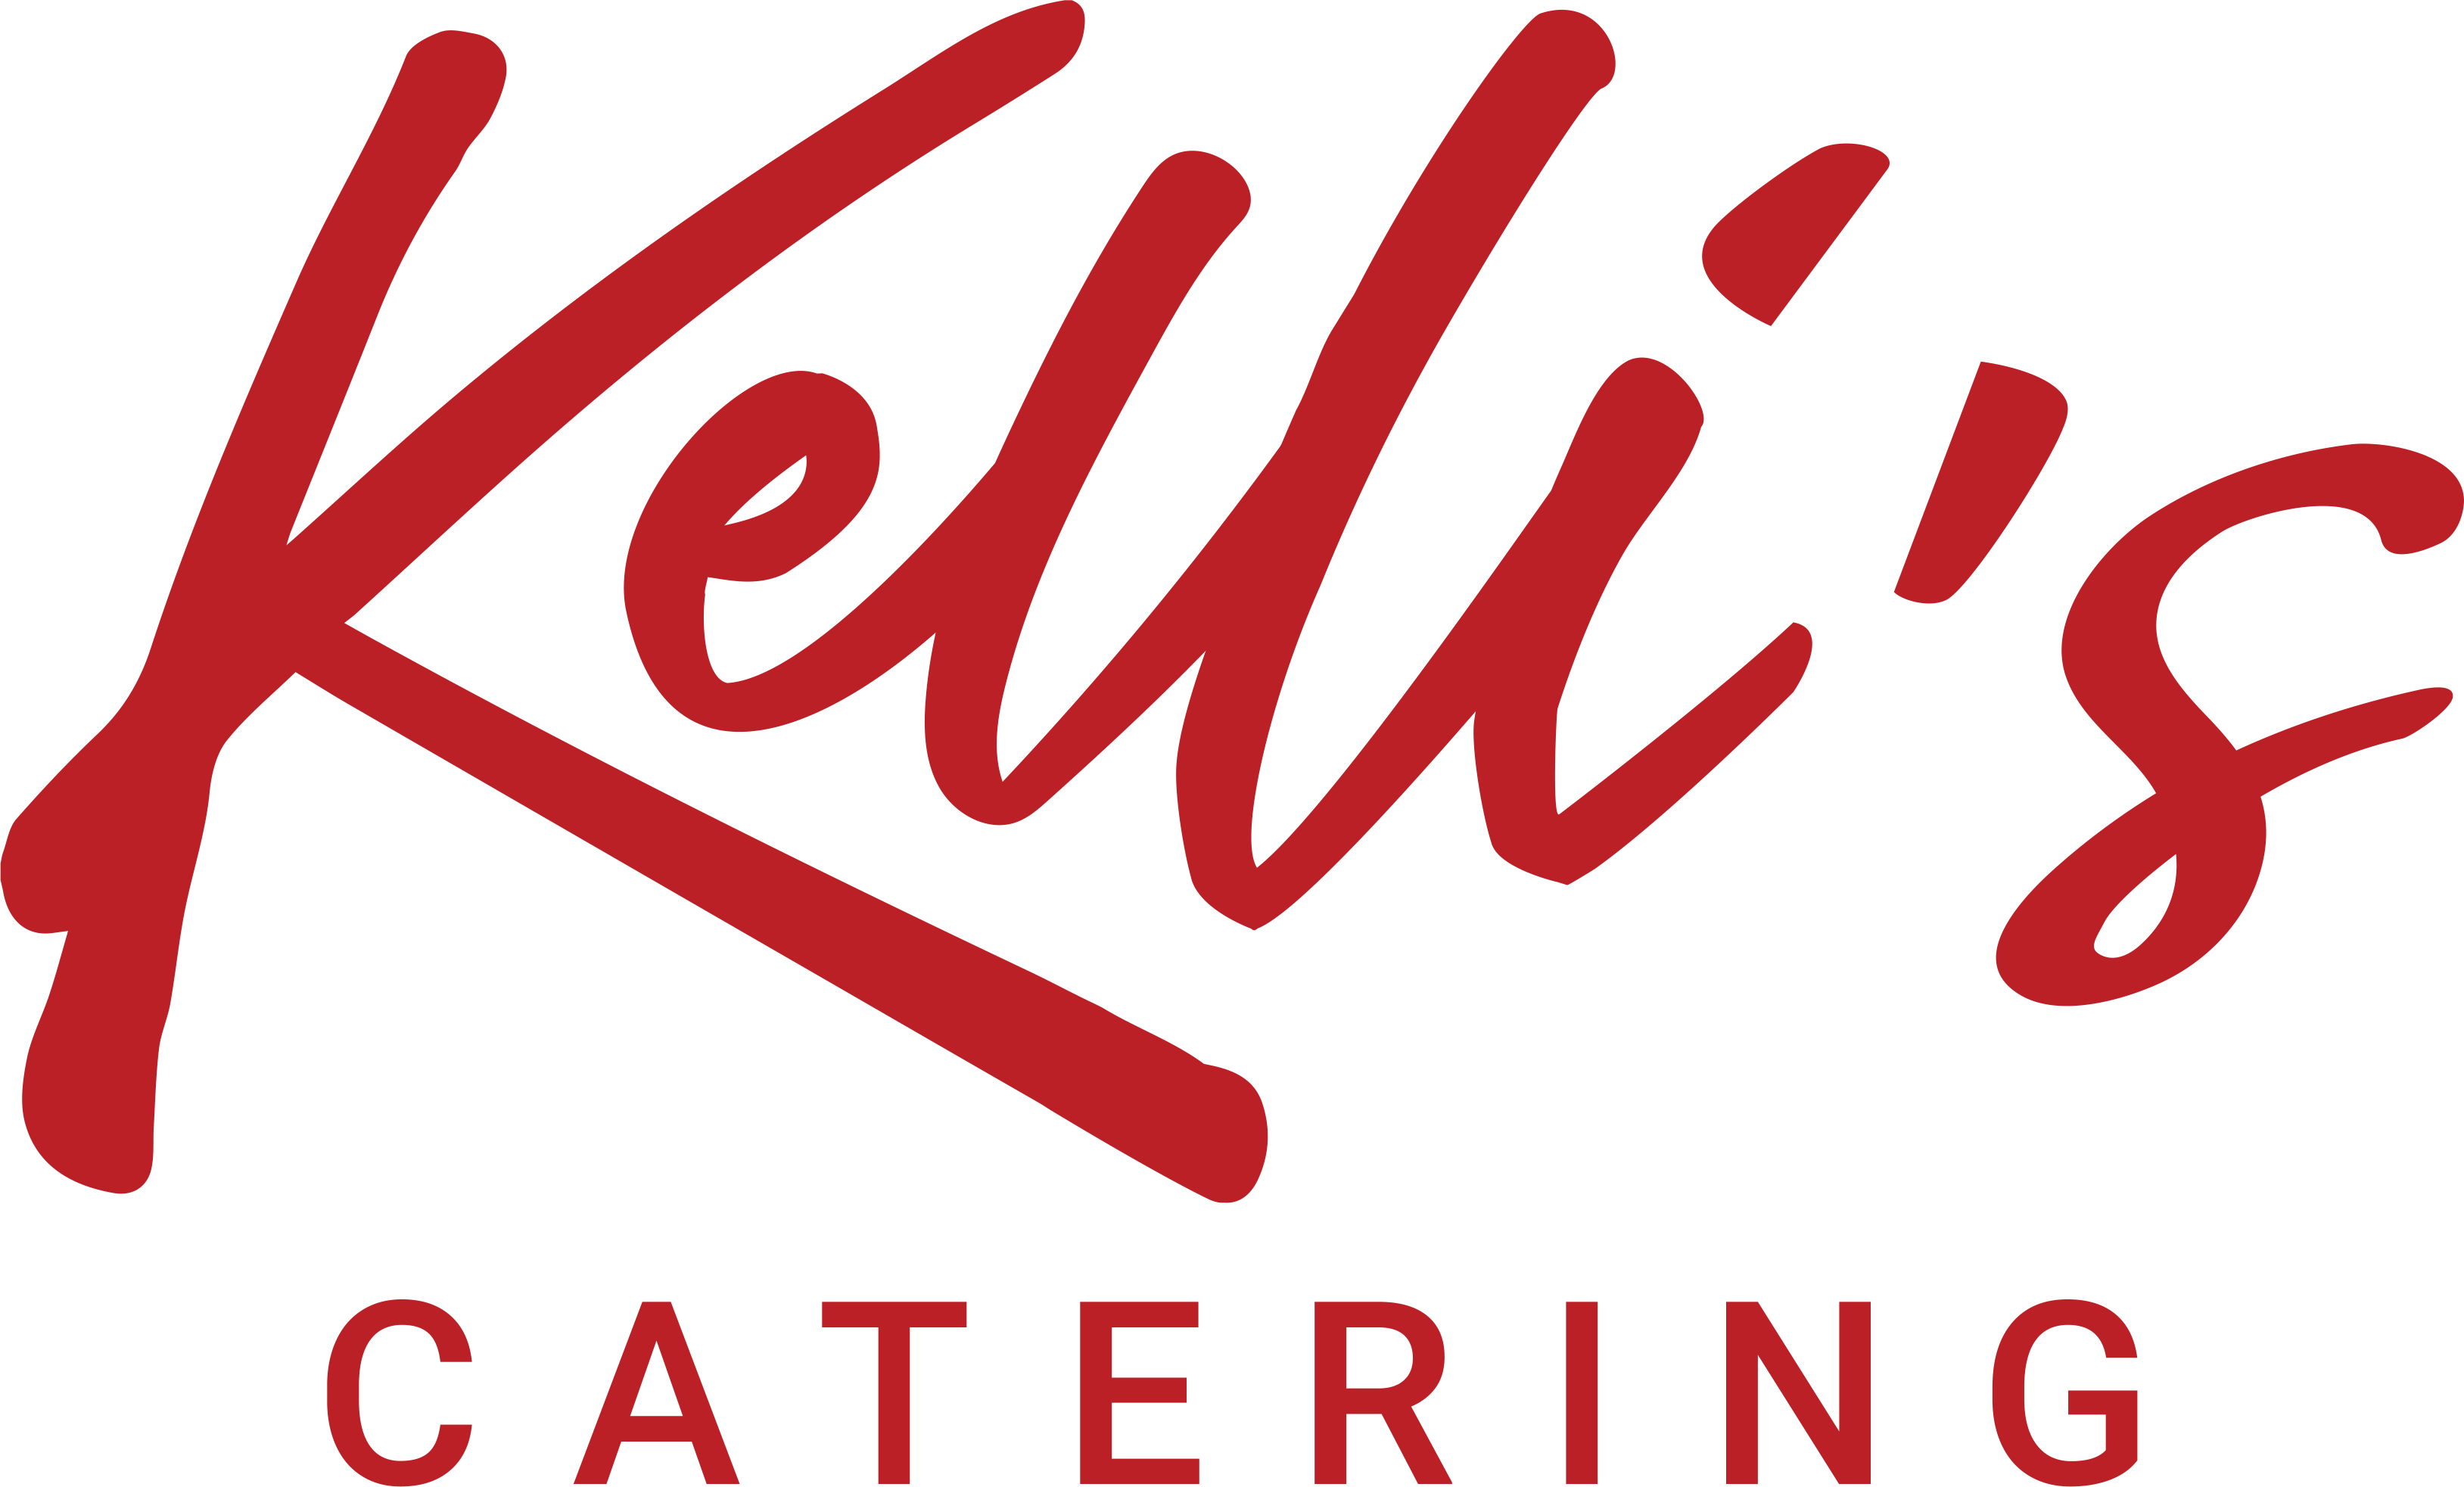 Kelli's Catering & Events